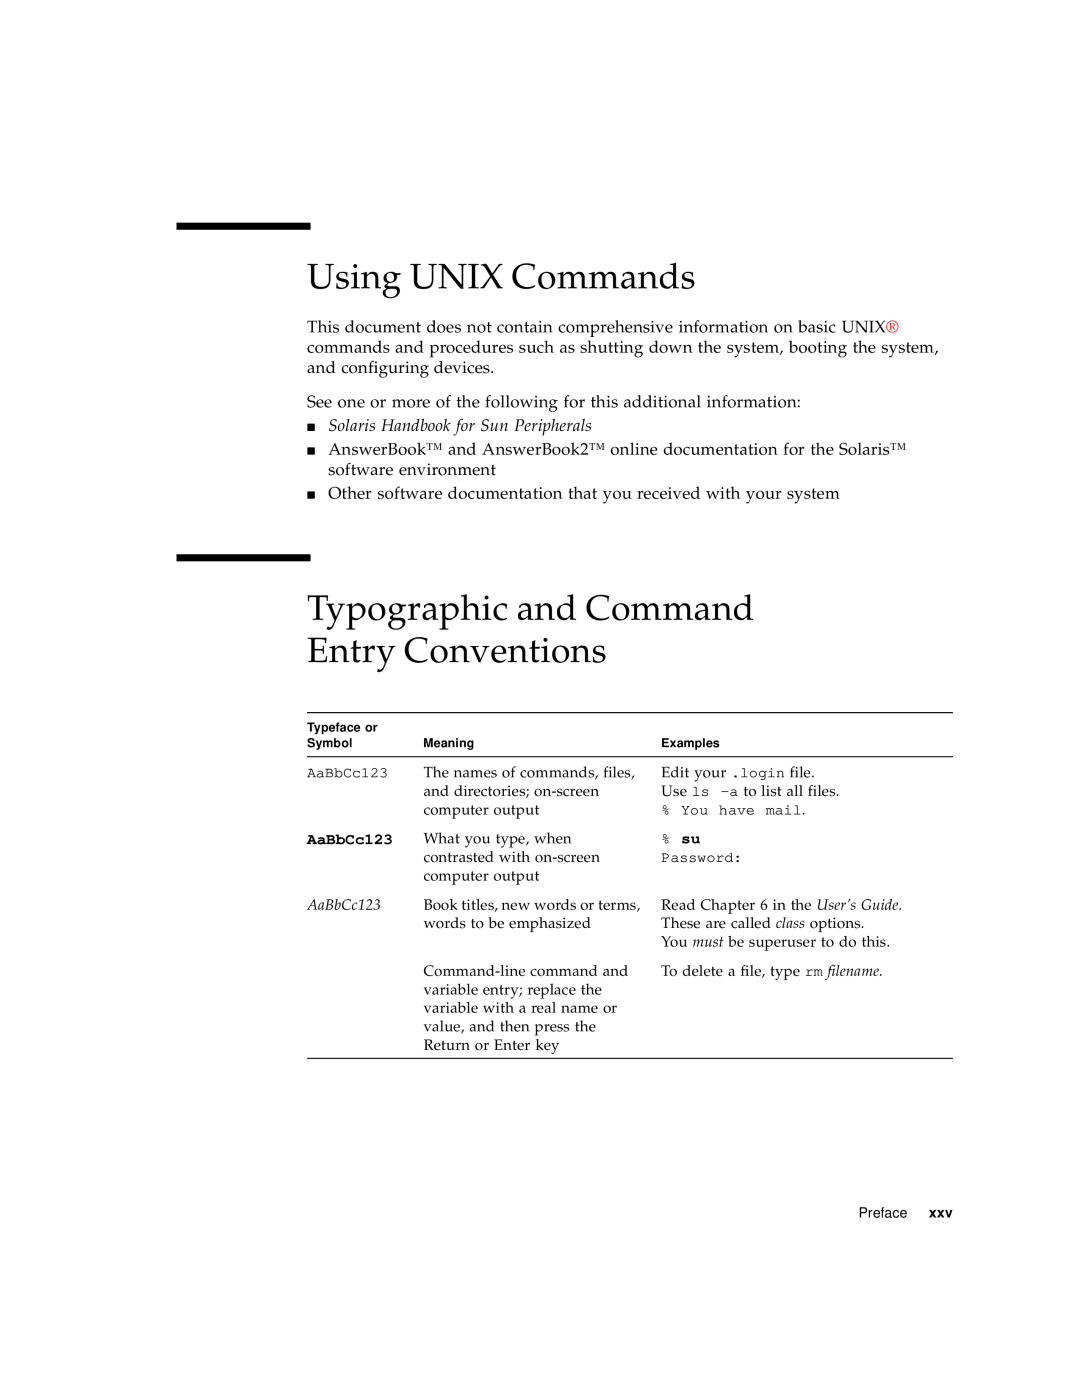 Sun Microsystems 220R Using UNIX Commands, Typographic and Command Entry Conventions, Solaris Handbook for Sun Peripherals 